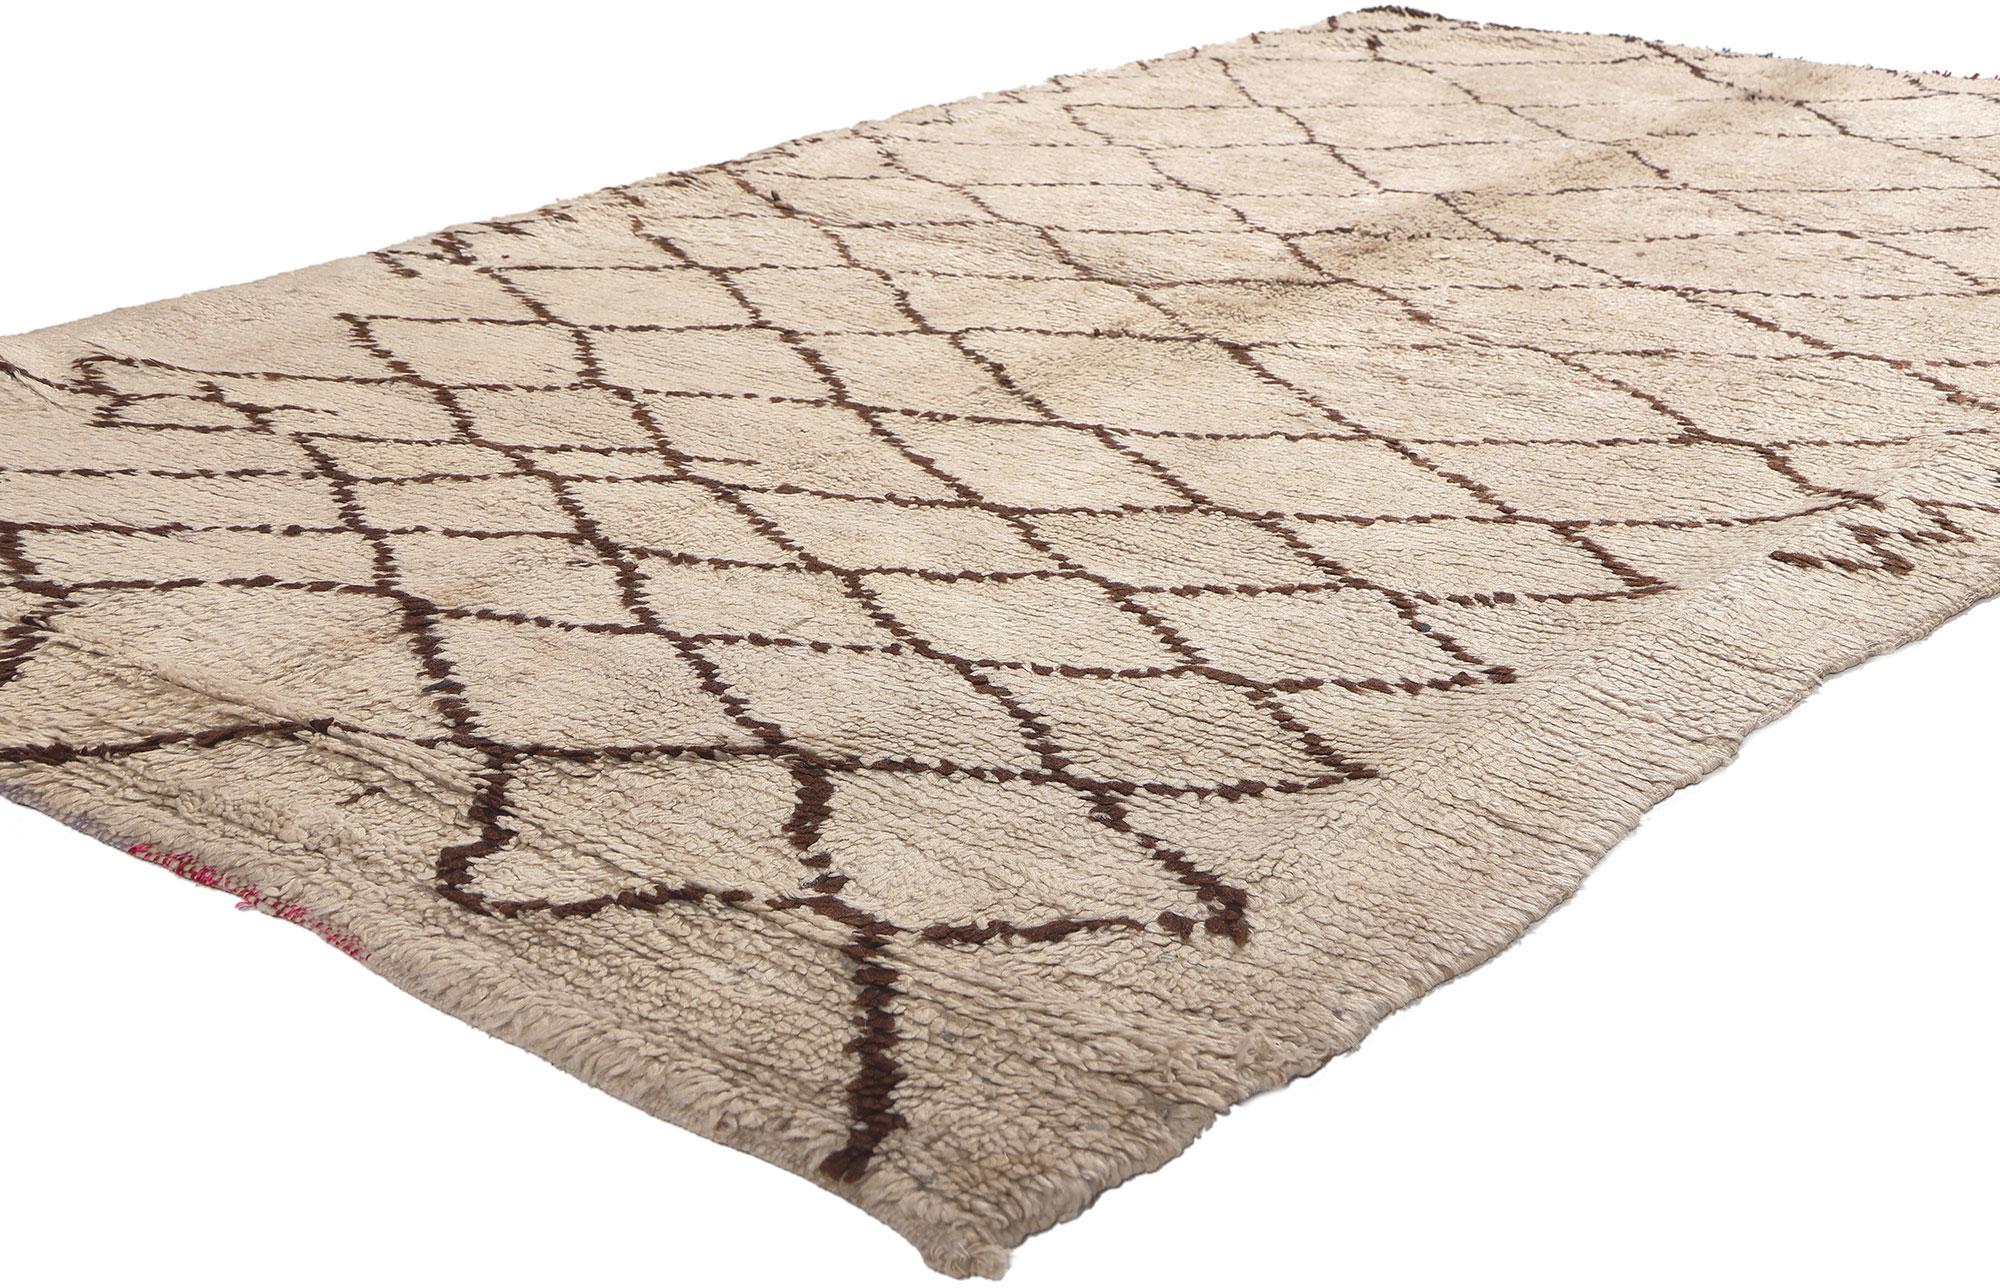 74172 Vintage Moroccan Azilal Rug, 04'08 x 08'03. Embark on a mystical journey into the heart of tradition with this hand-knotted wool Berber Moroccan Azilal rug, where the tribal women of the Azilal region weave enchanting tales of life's